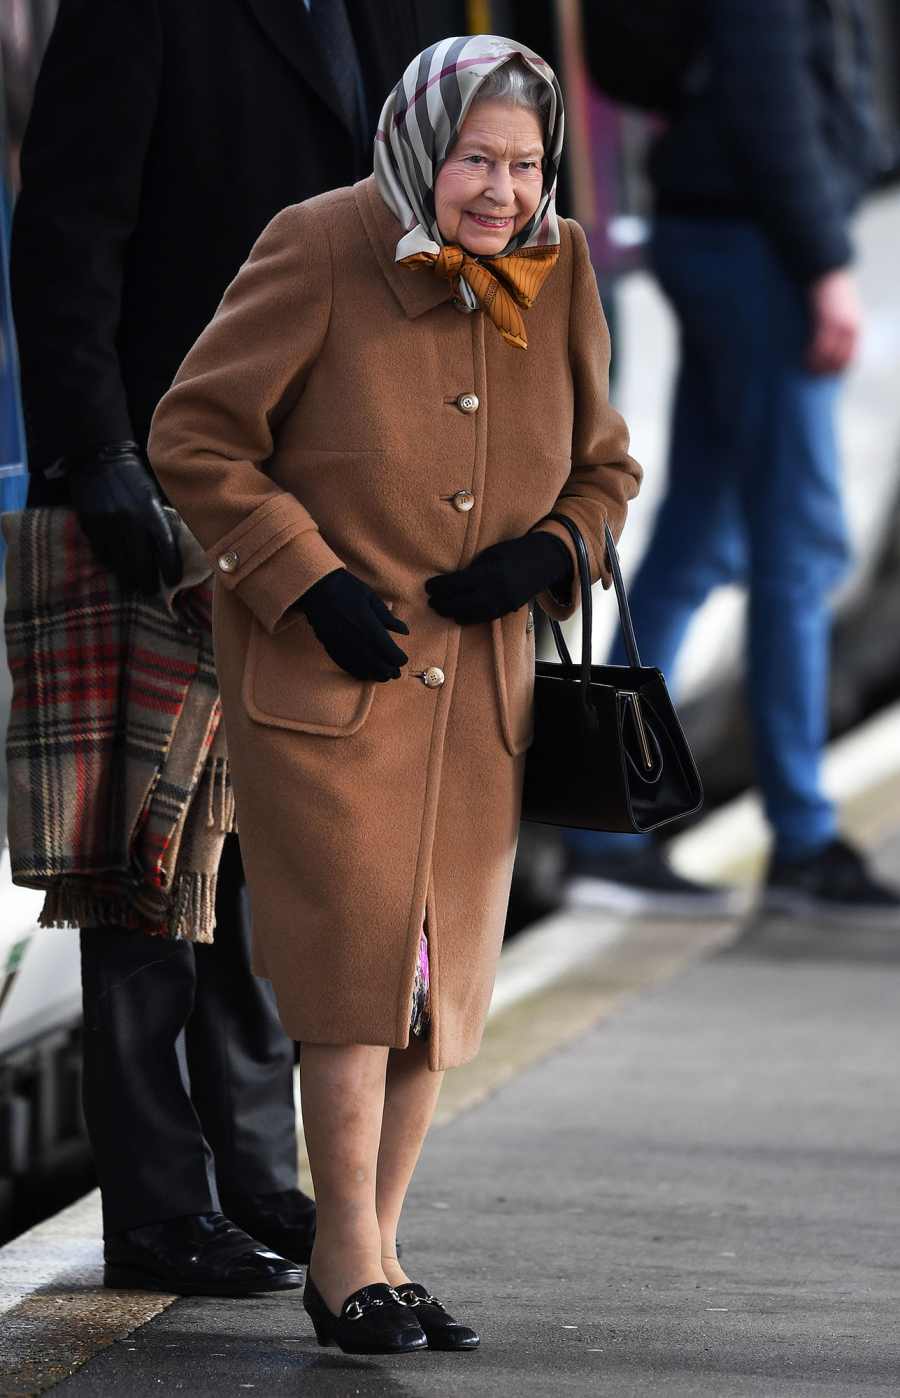 The Queen wraps up warm as she takes train to Norfolk for annual Christmas break